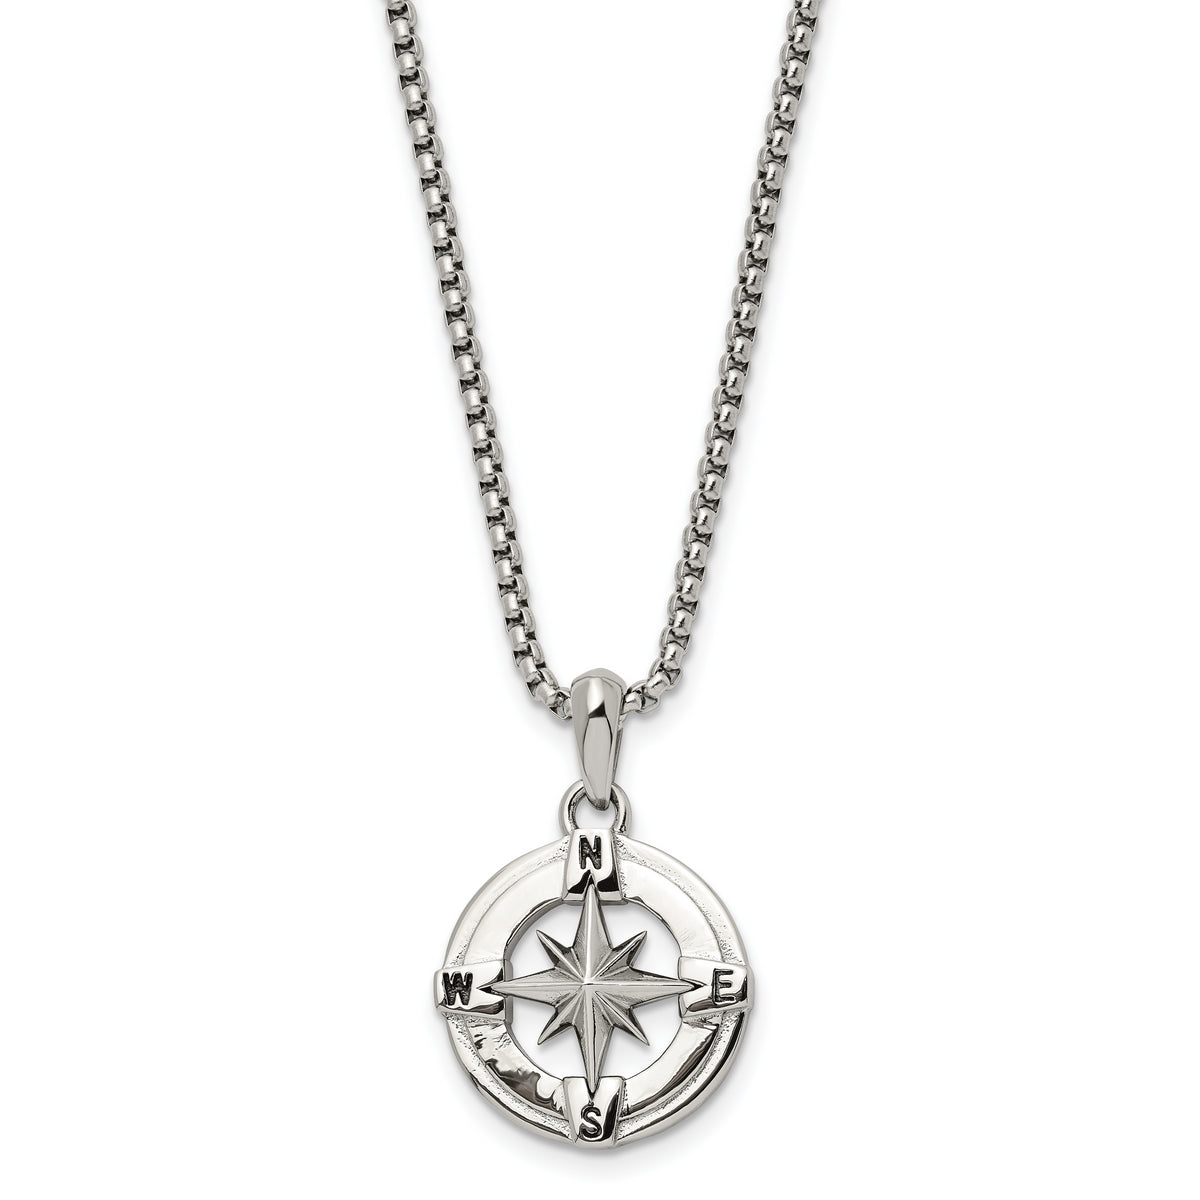 Chisel Stainless Steel Polished Compass Pendant on a 22 inch Box Chain Necklace